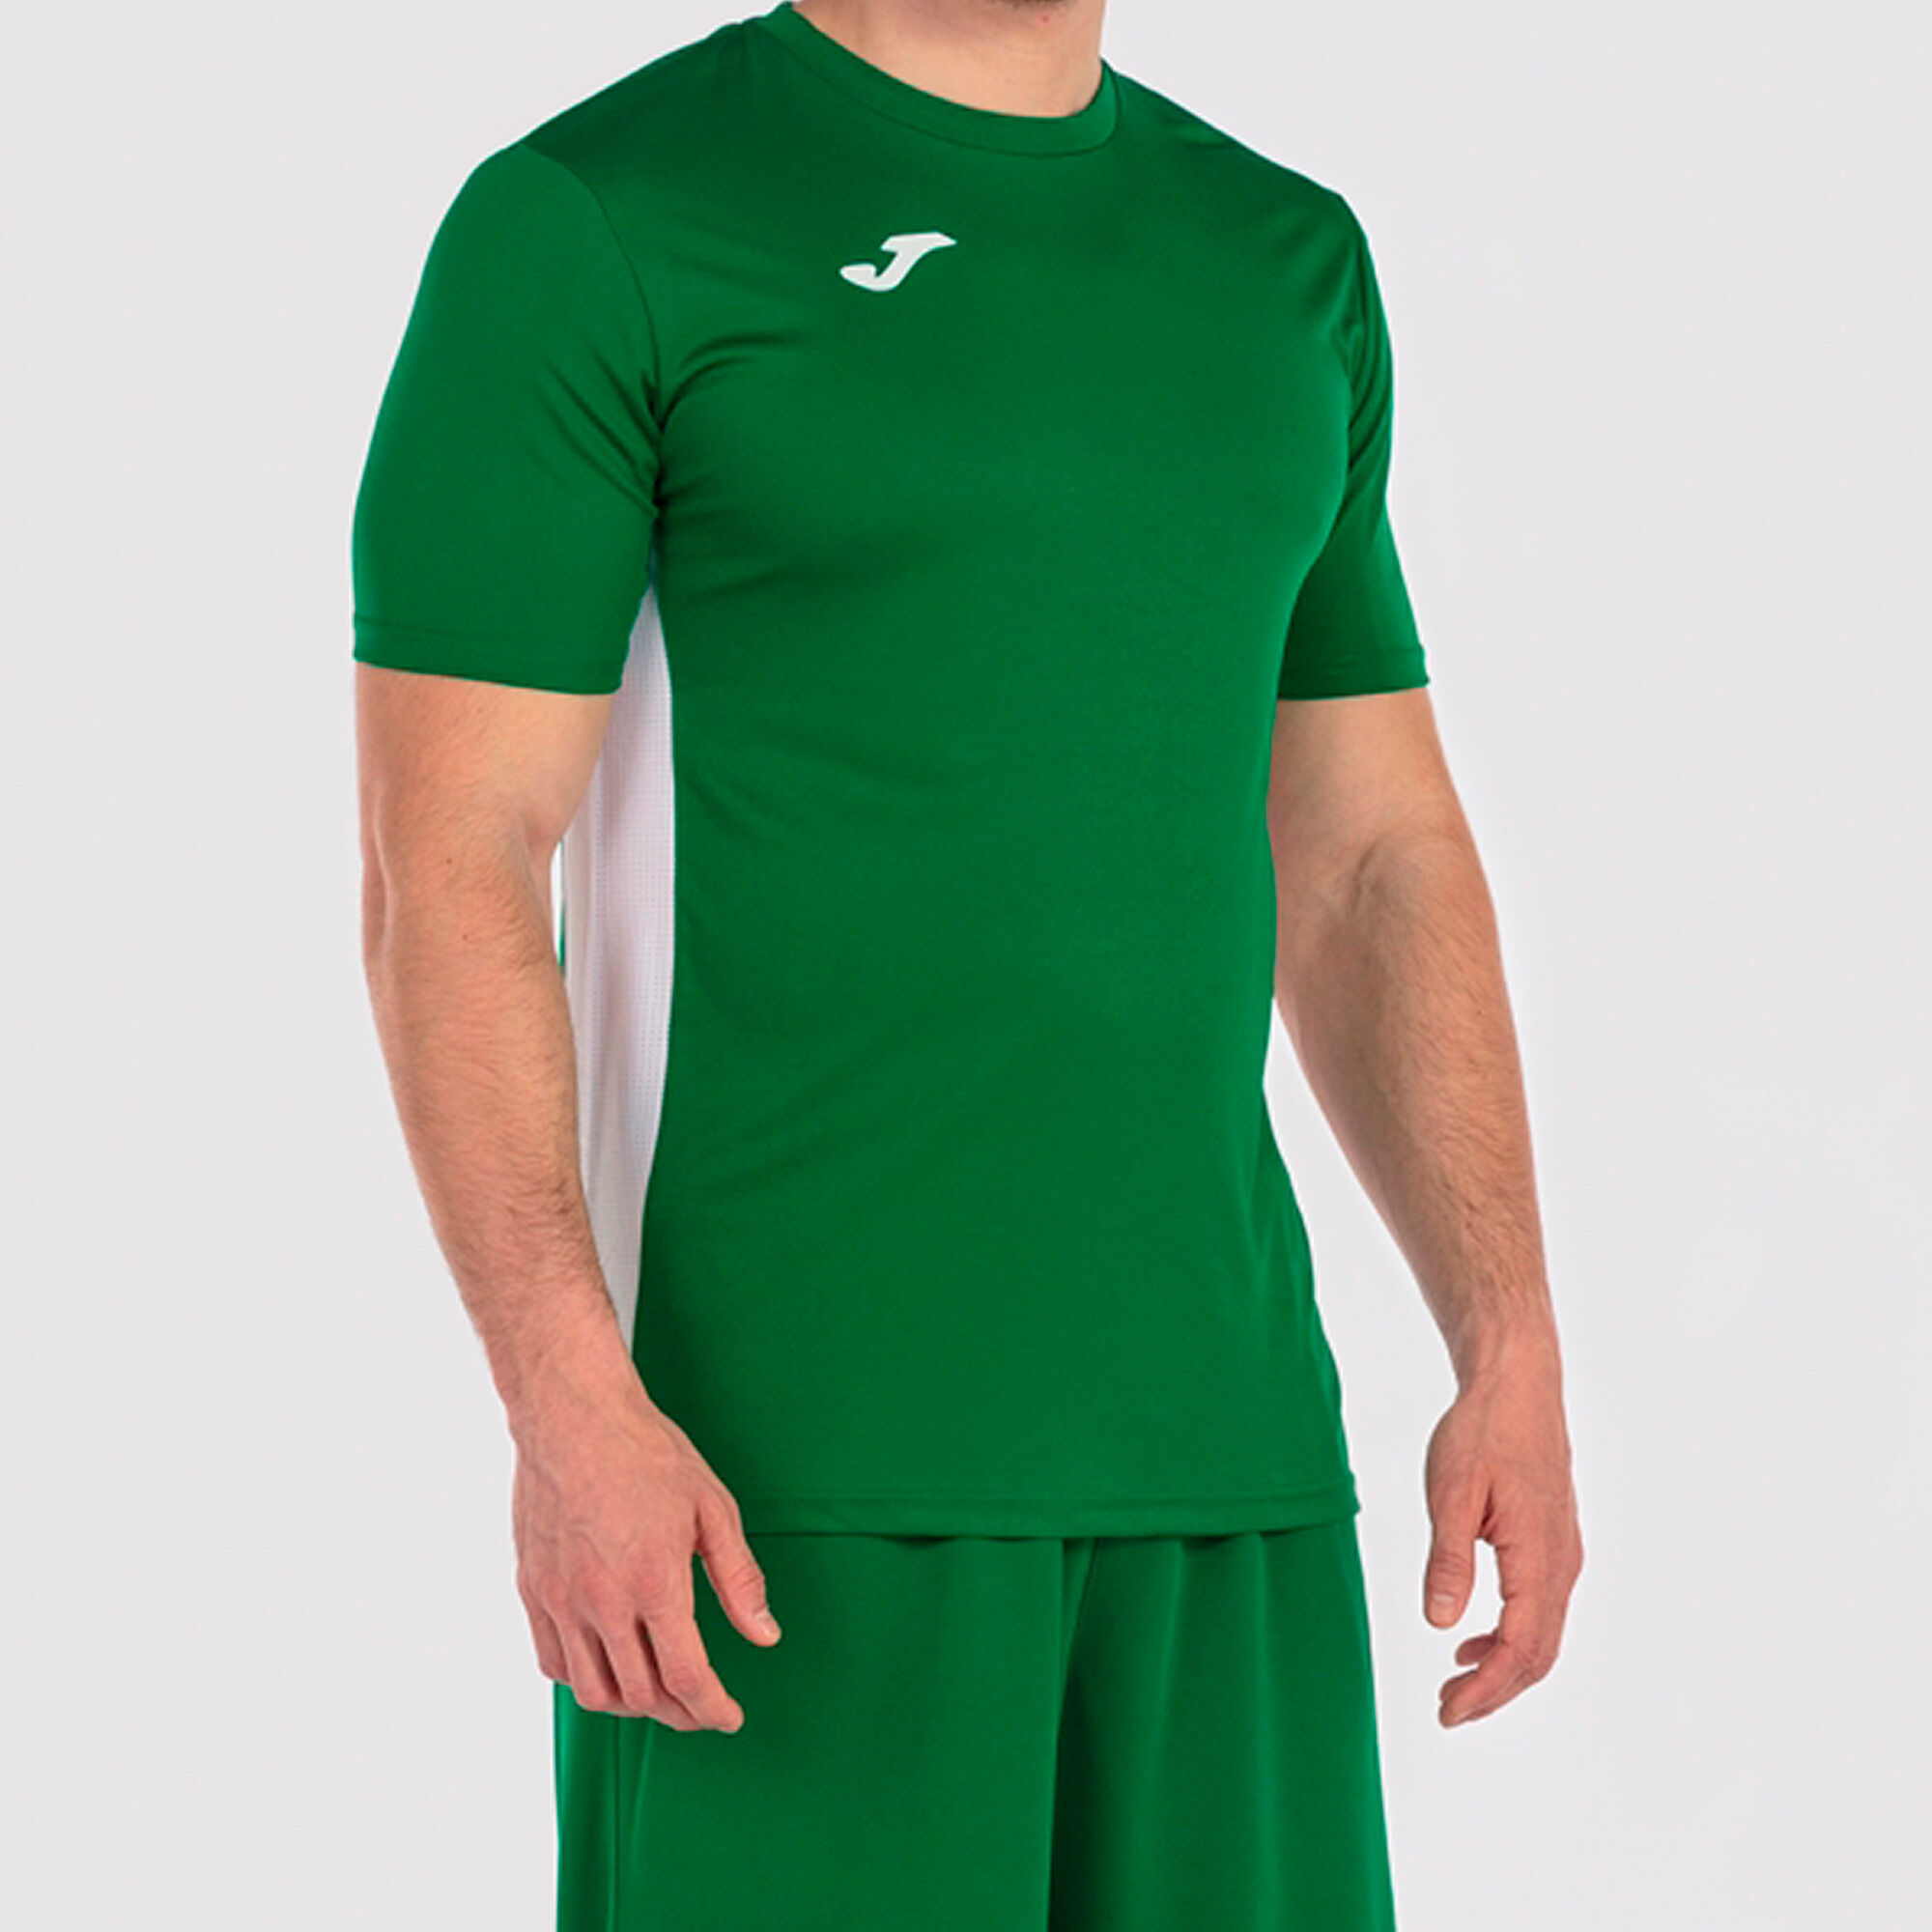 Maillot manches courtes homme Cosenza vert blanc